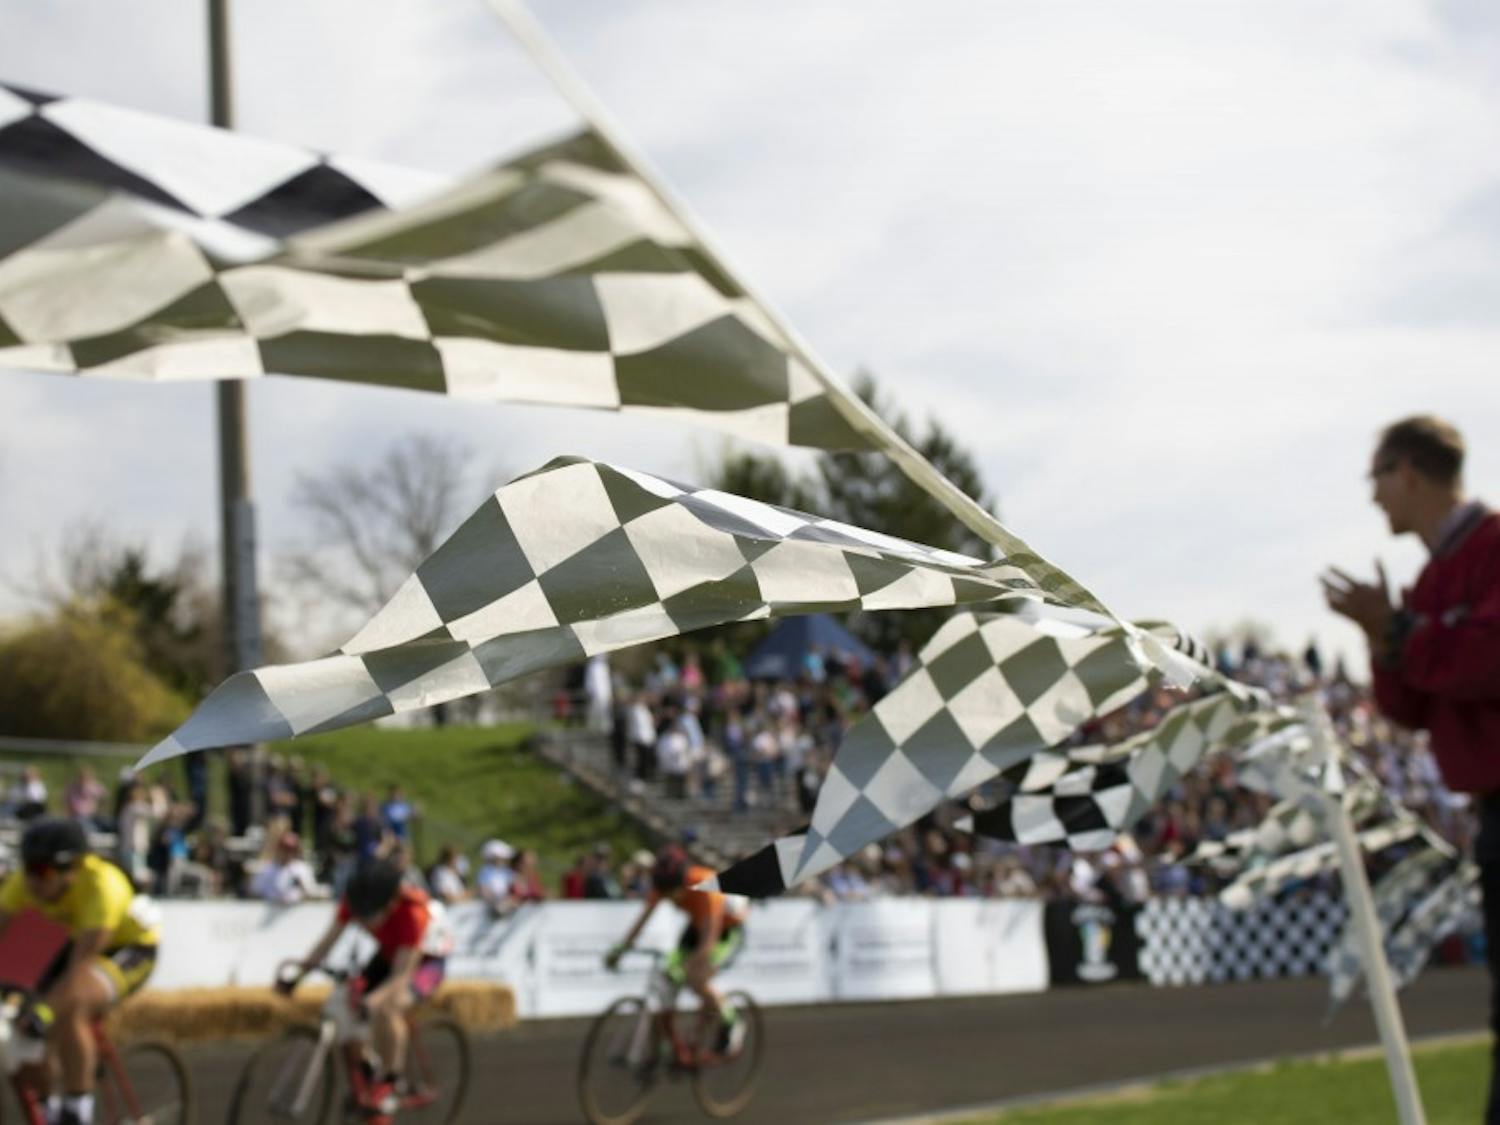 GALLERY: Teter finishes first in the 2019 Women's Little 500